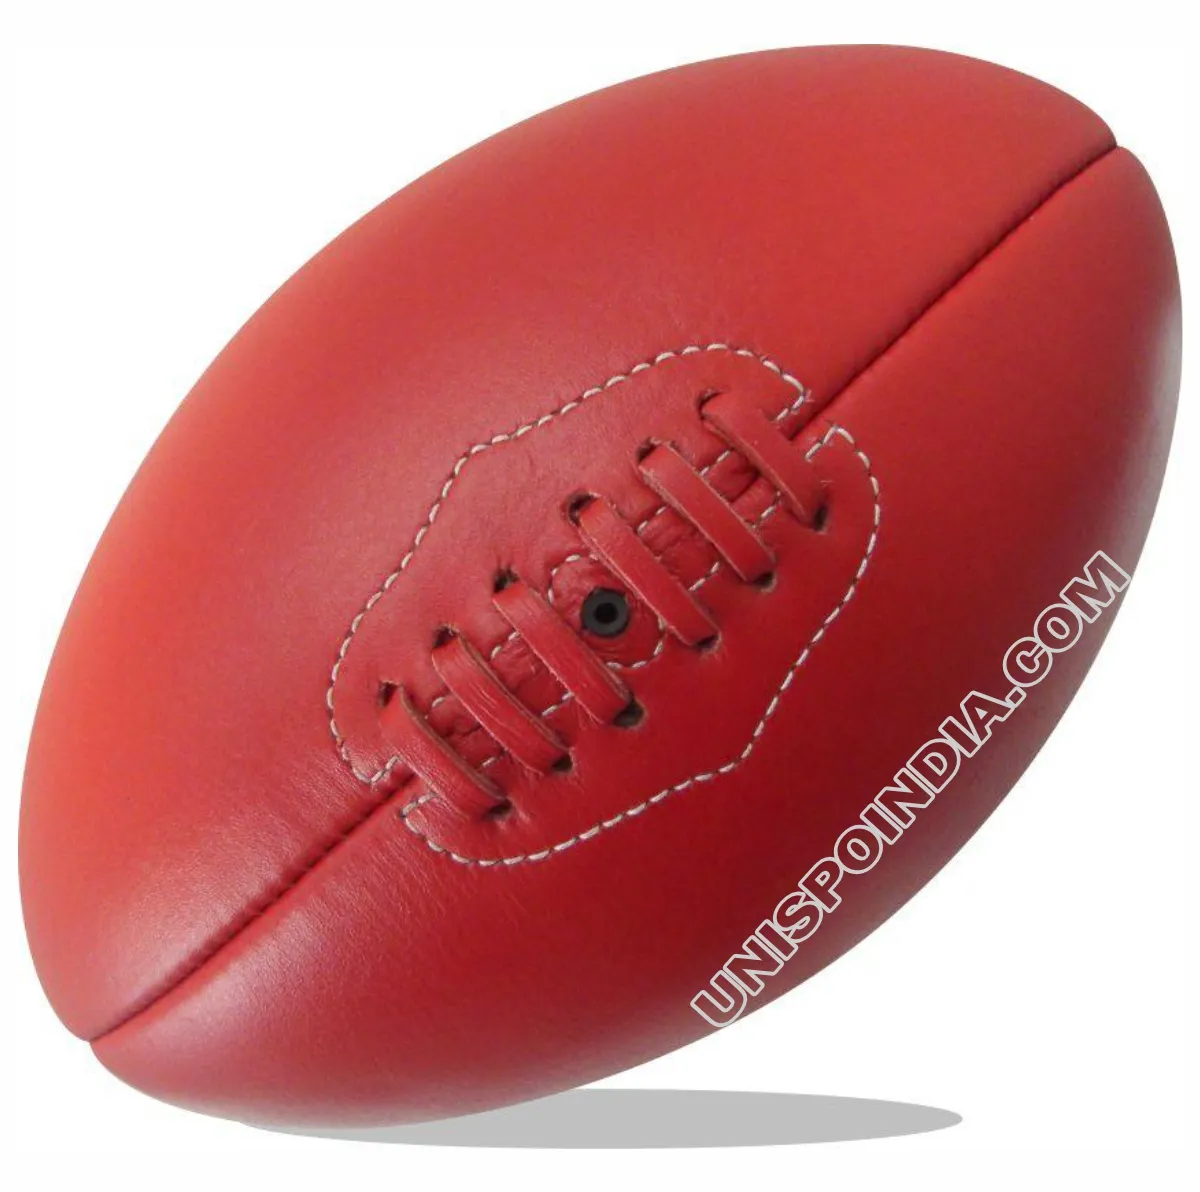 Vintage Rugby ball